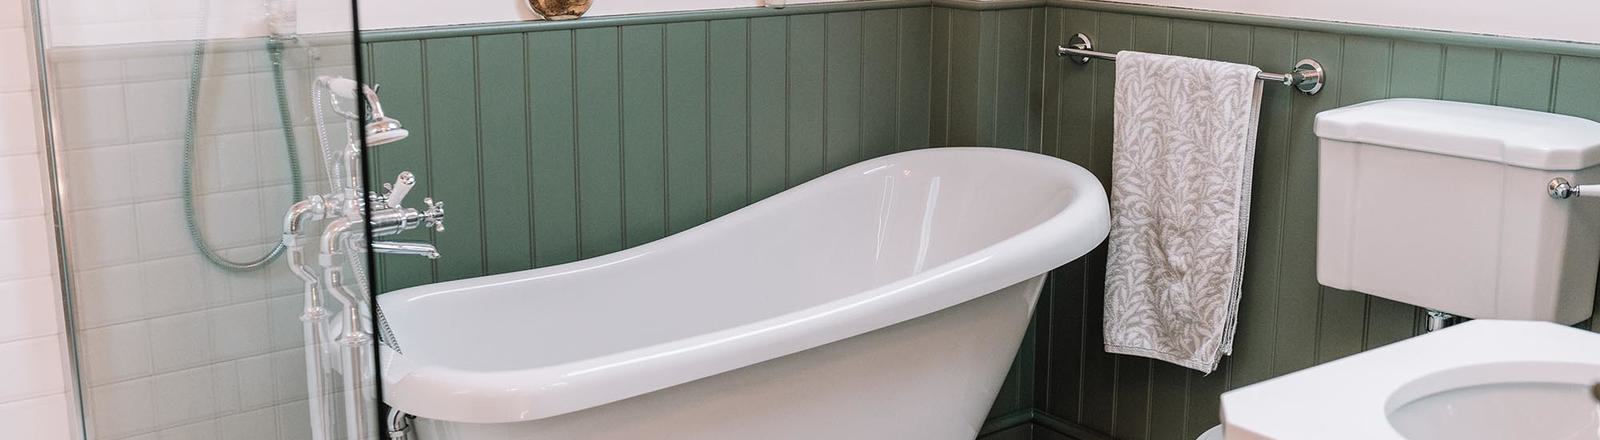 How to create a traditional country bathroom look